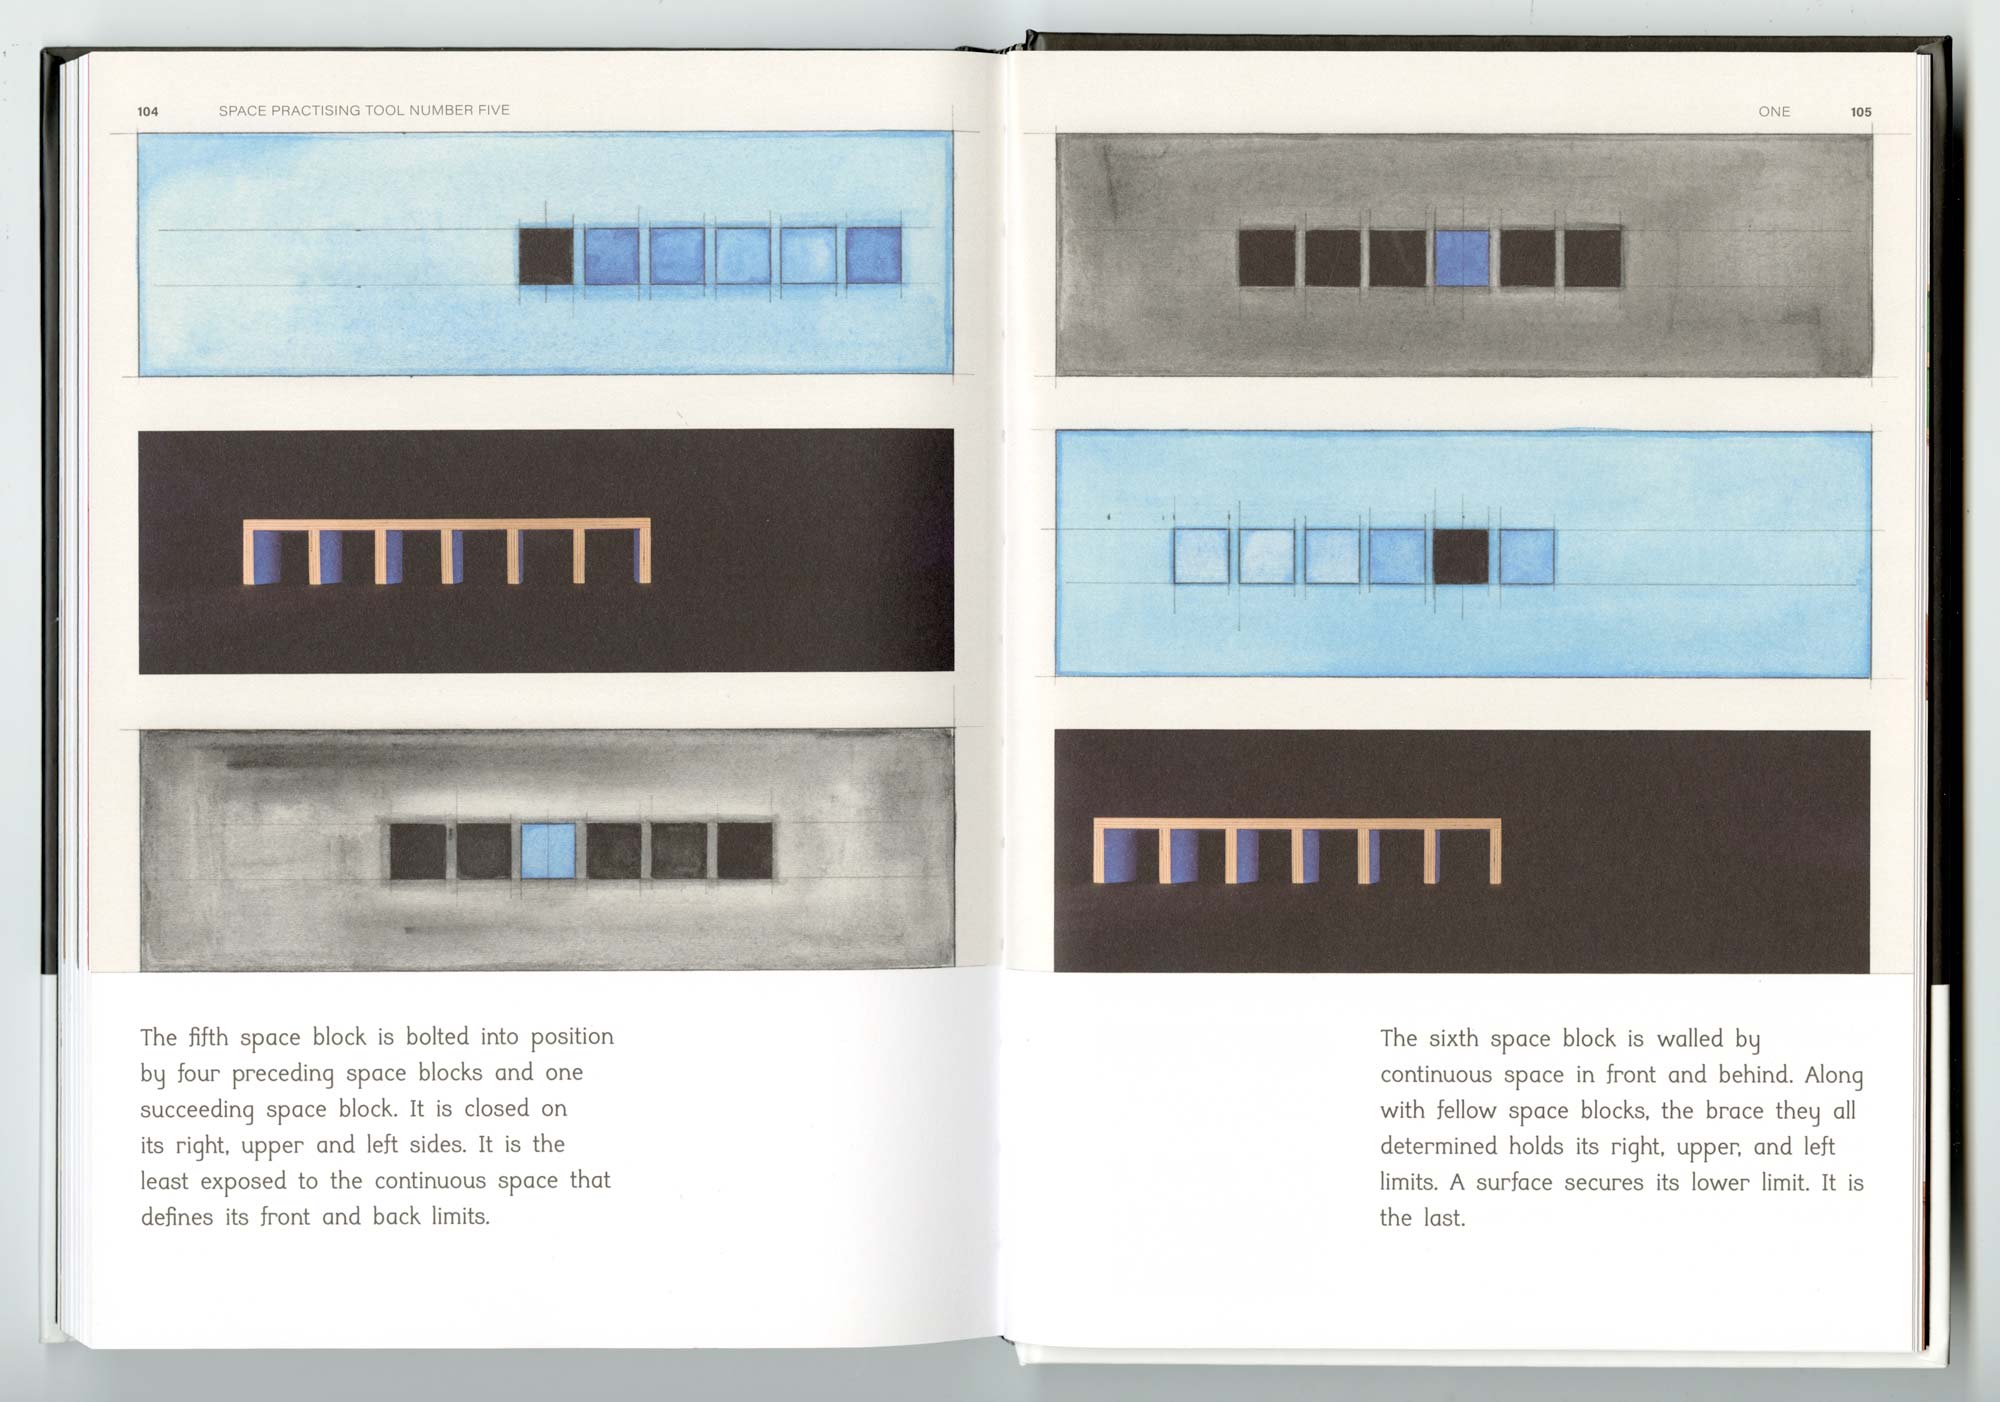 Technical watercolour drawings, a series of 3 one above the other, then a paragraph of text below. On the right page, shows the same